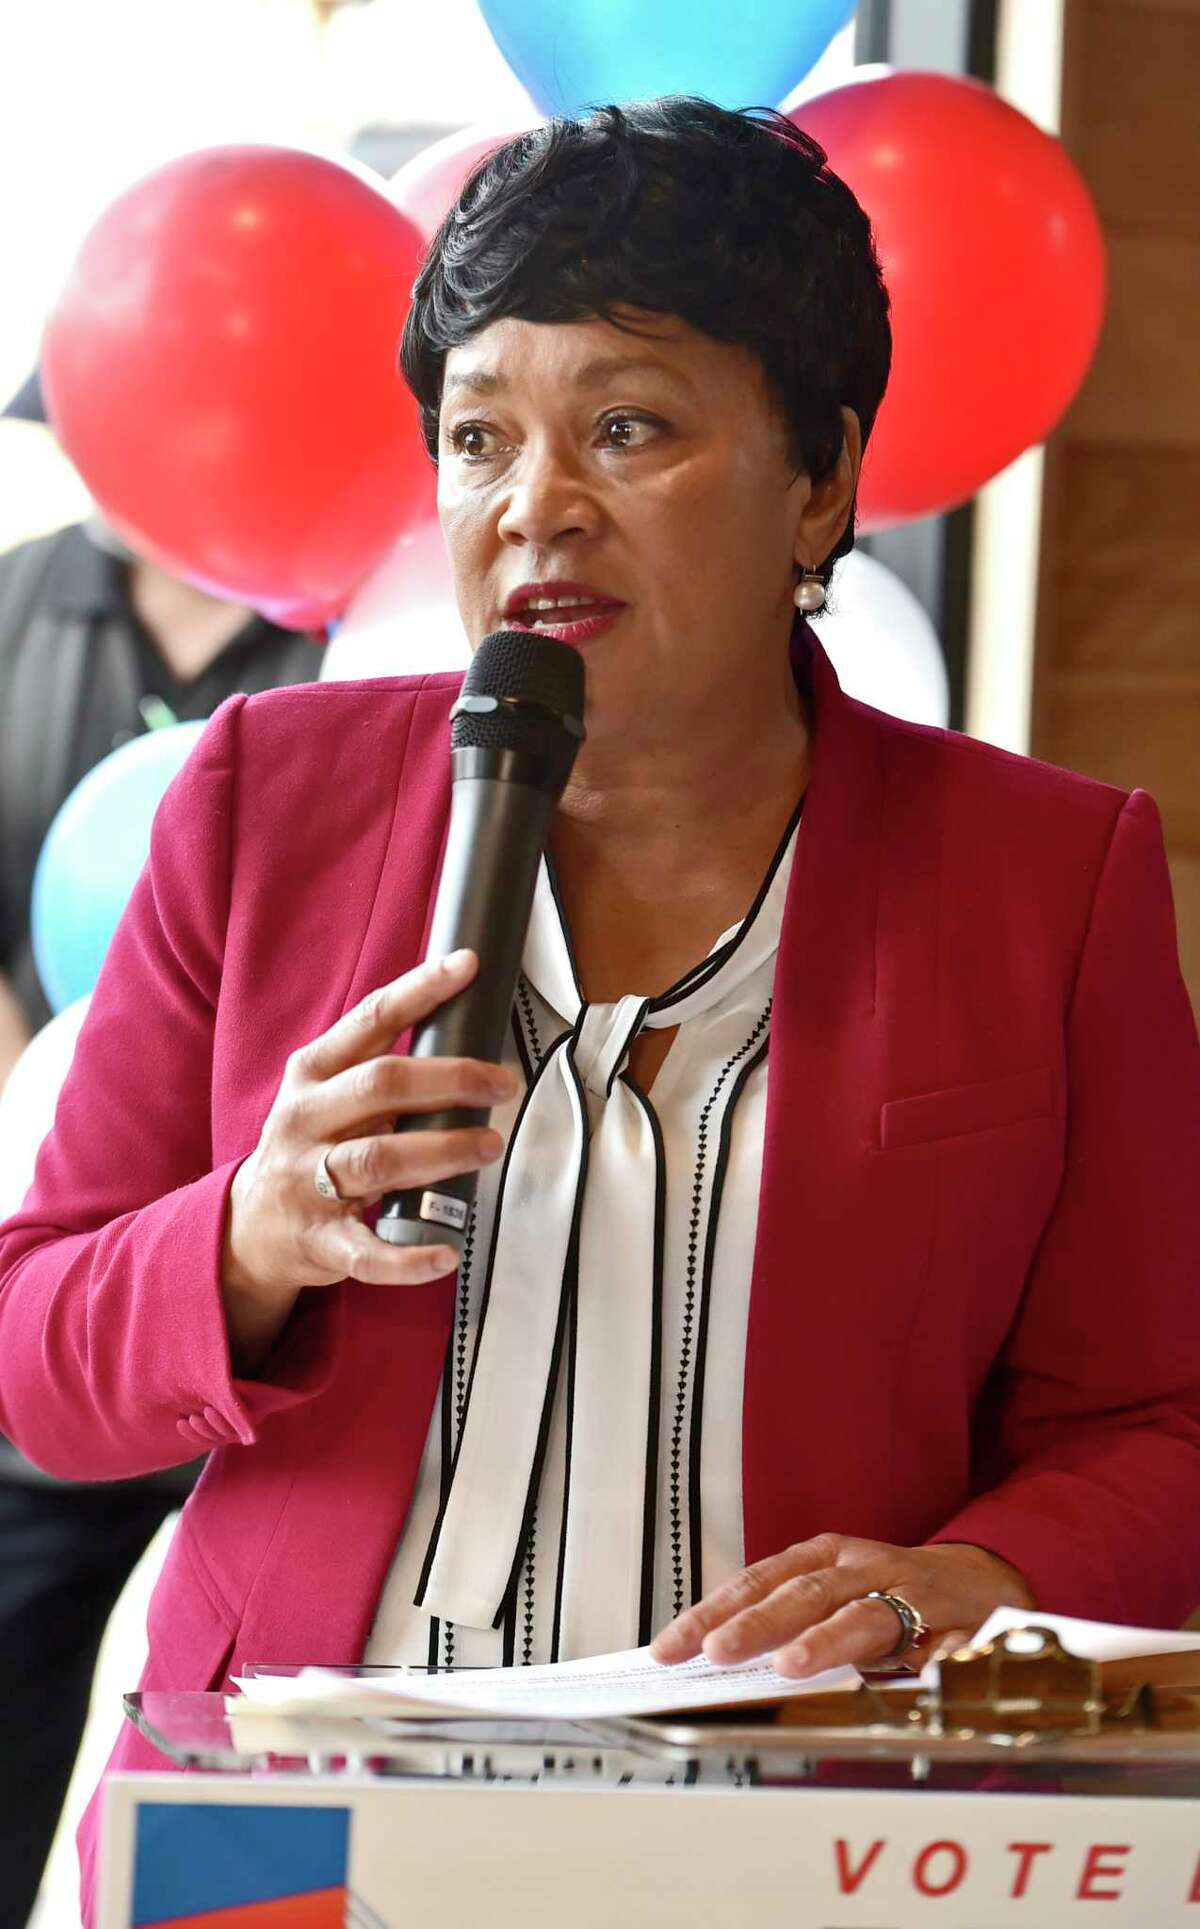 New Haven, Connecticut - Saturday, April 13, 2019: New Haven Mayor Toni Harp at her rally Saturday at the Stack barbecue restaurant in New Haven kicking of her re-election campaign.